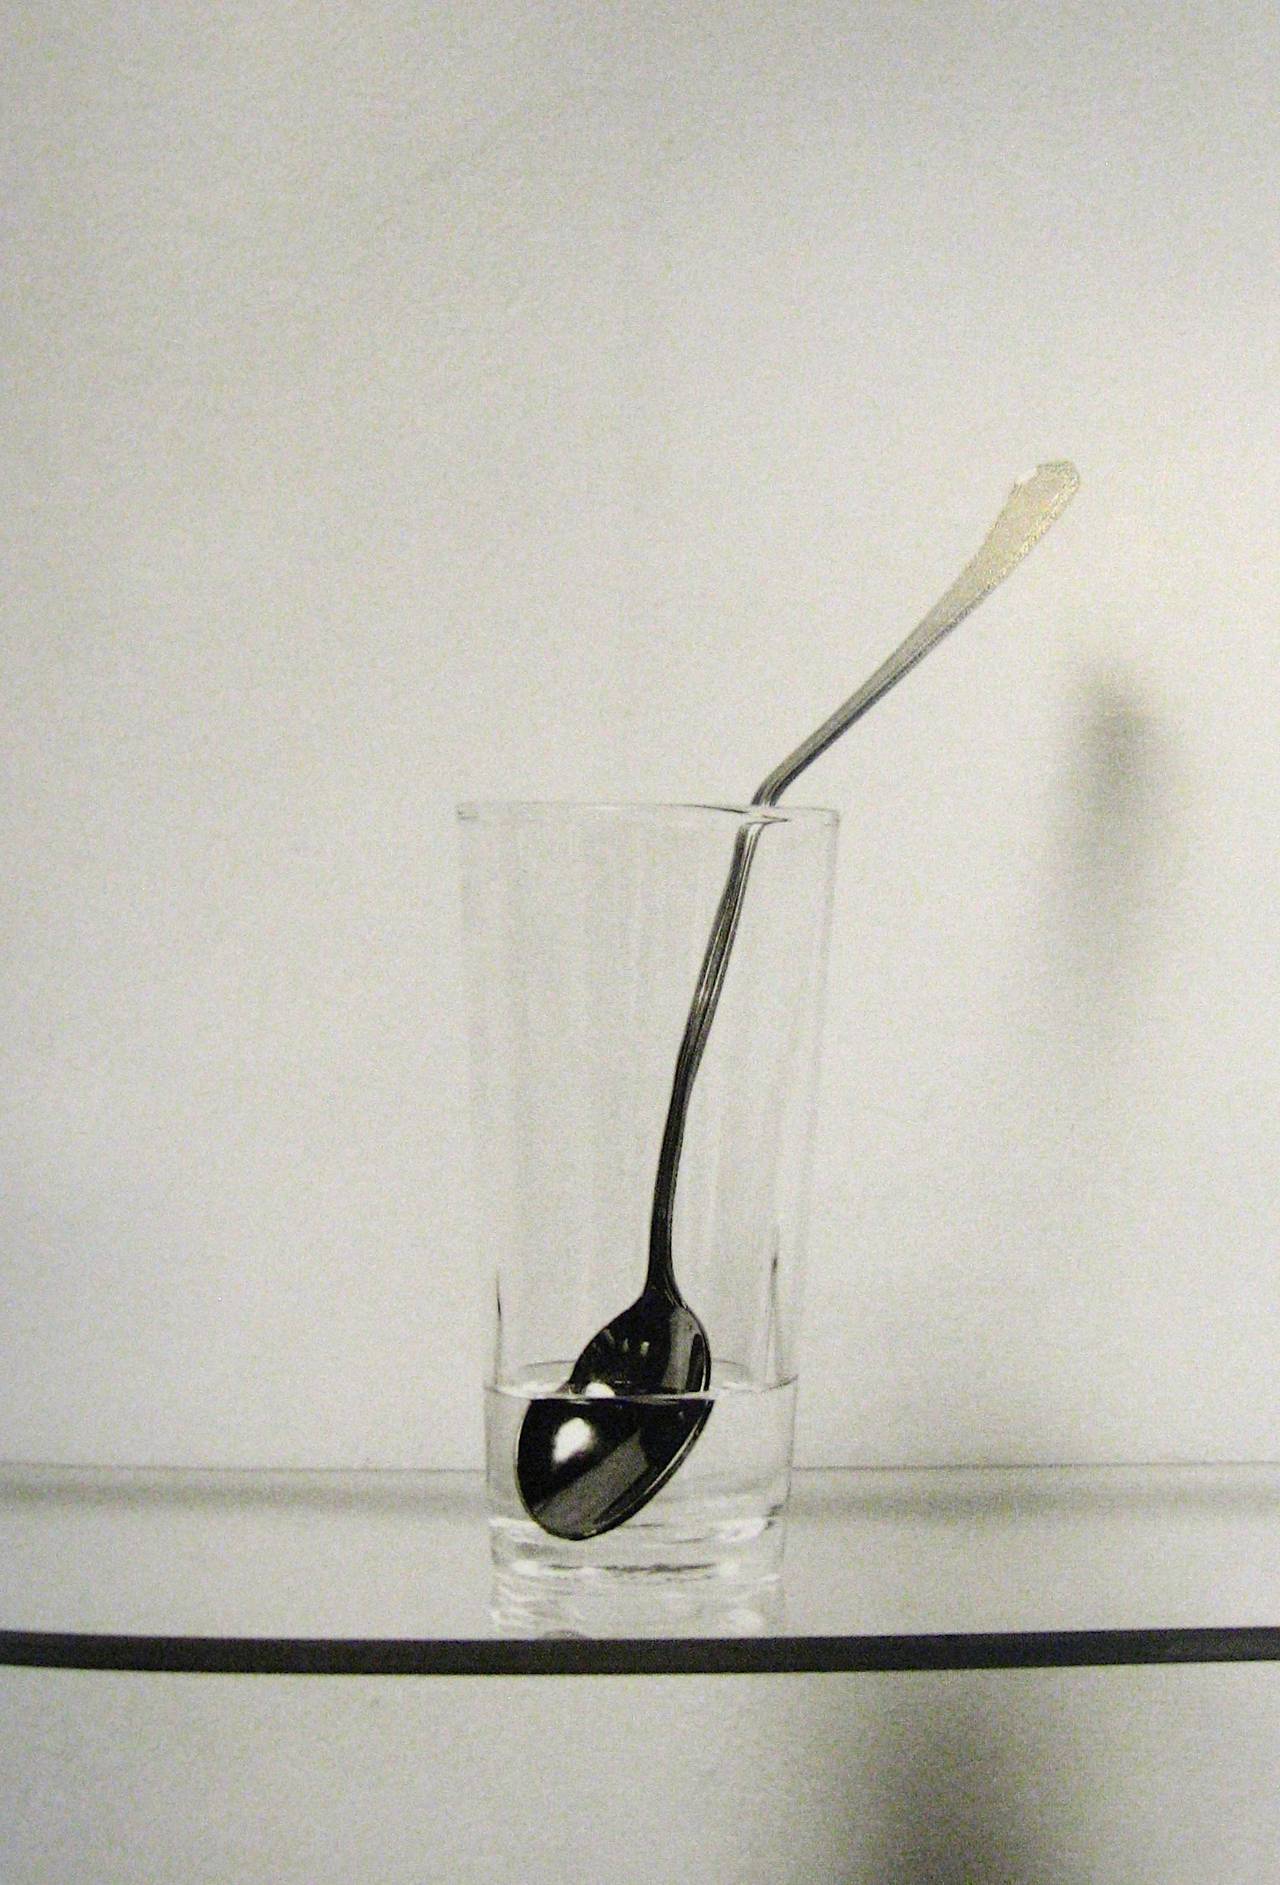 Untitled - Triptych (Bent Spoons) - Photograph by Chema Madoz